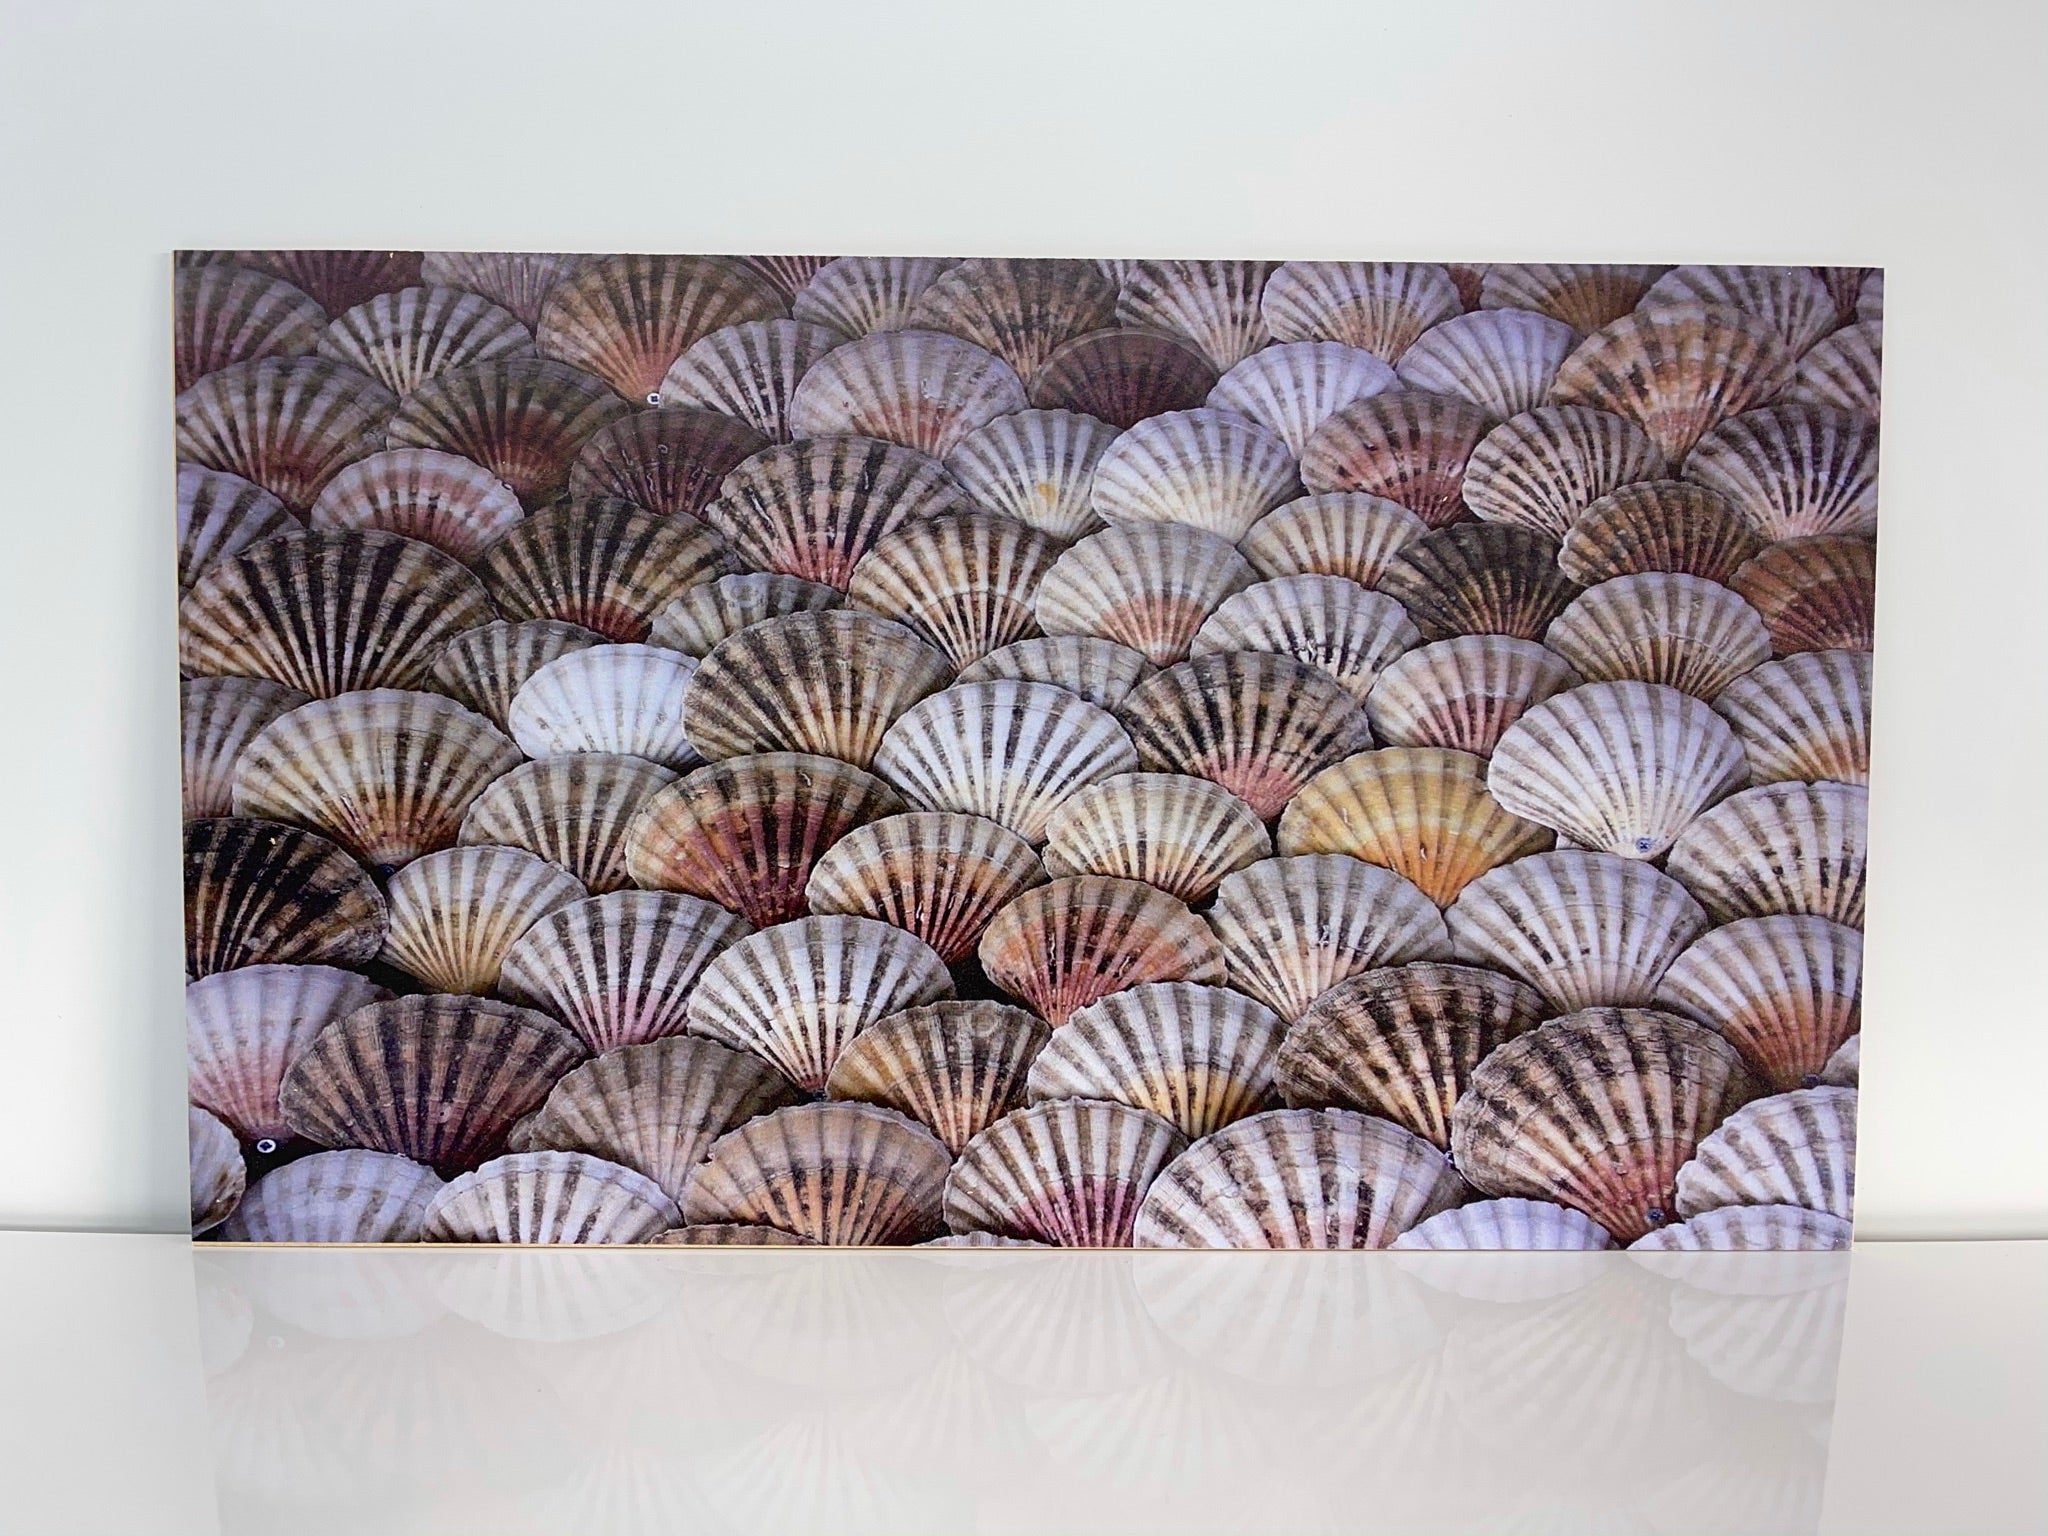 Seashell Wall Design Pattern Universal Ply – Toldincolor